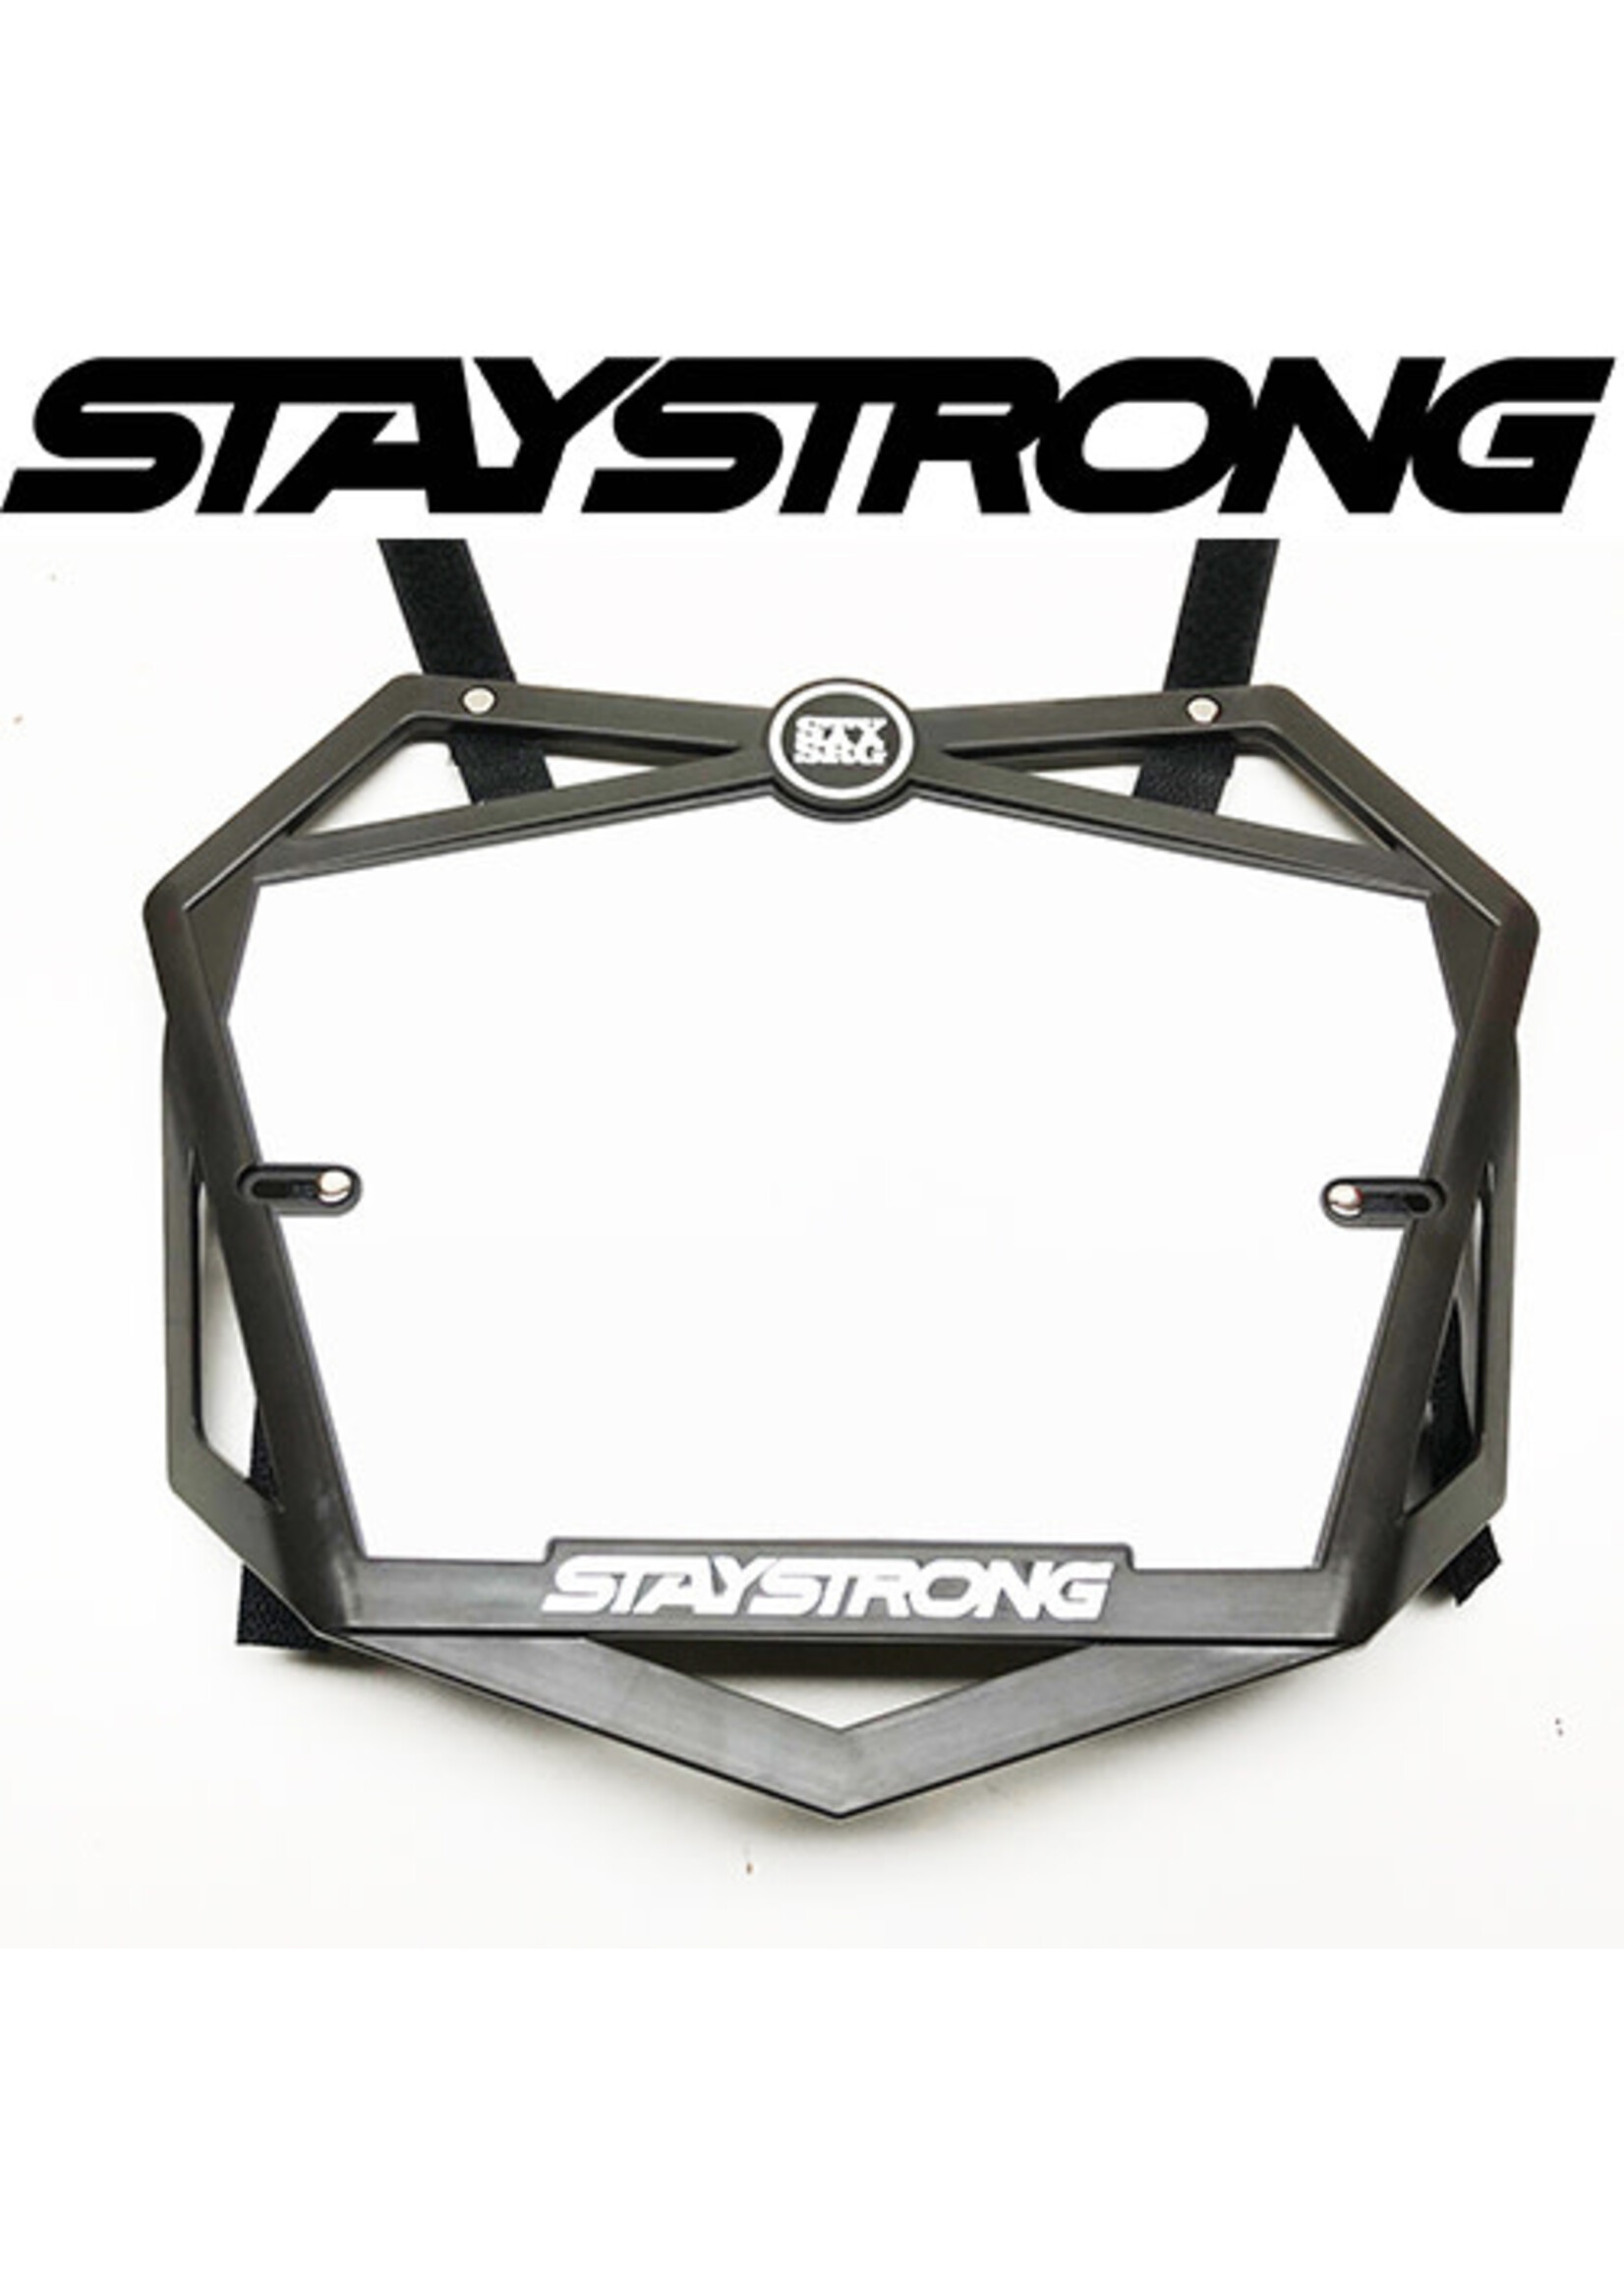 Stay Strong Plate BMX Staystrong